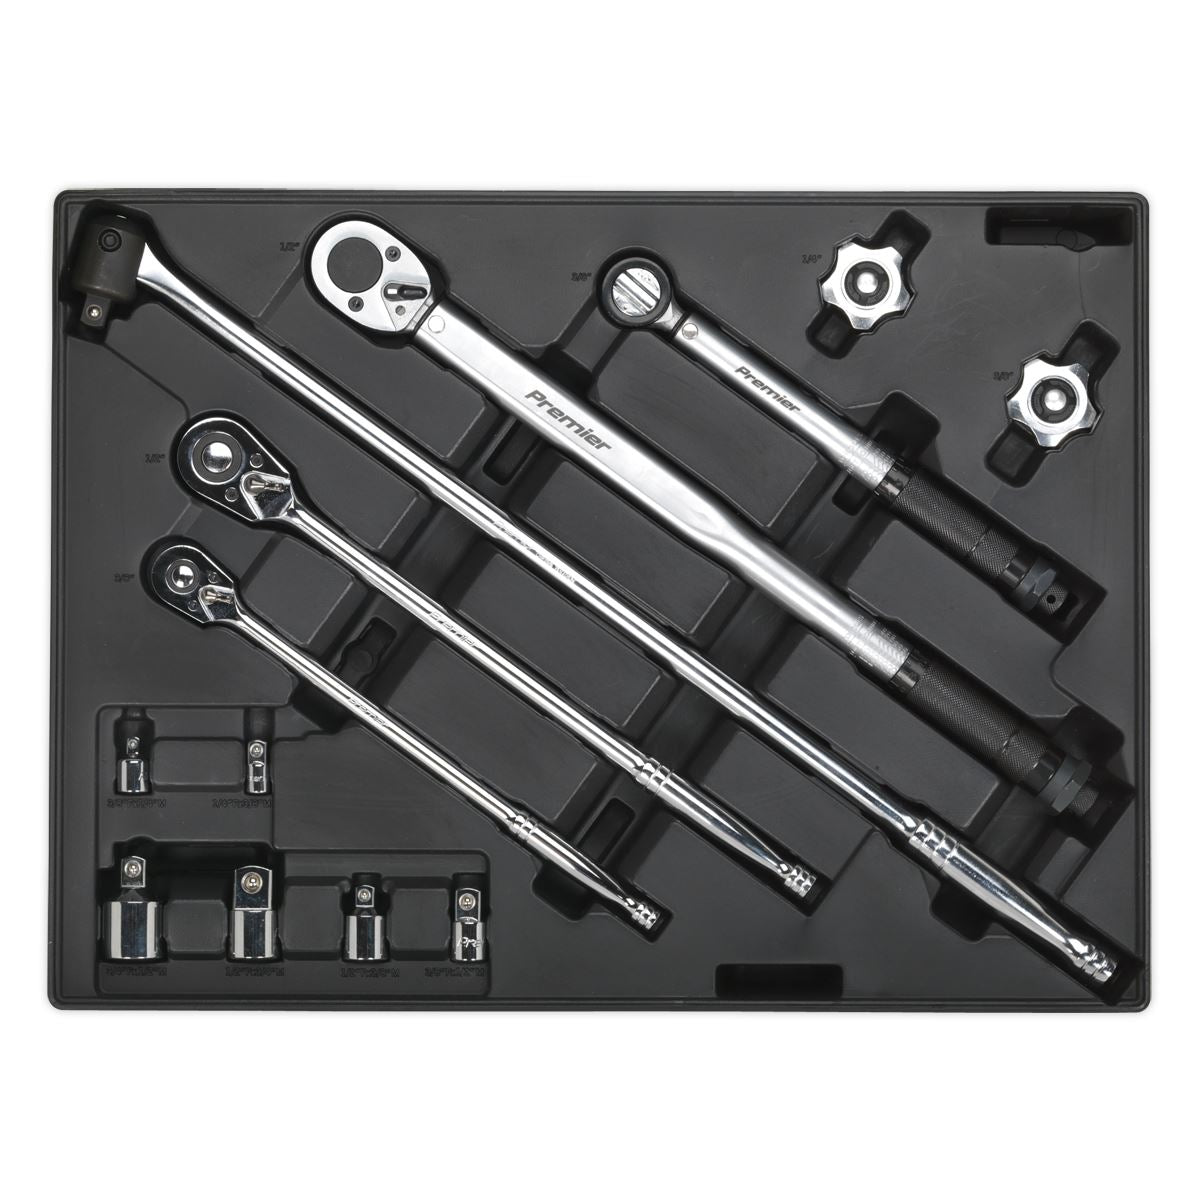 Sealey Premier Tool Tray with Ratchet, Torque Wrench, Breaker Bar & Socket Adaptor Set 13pc